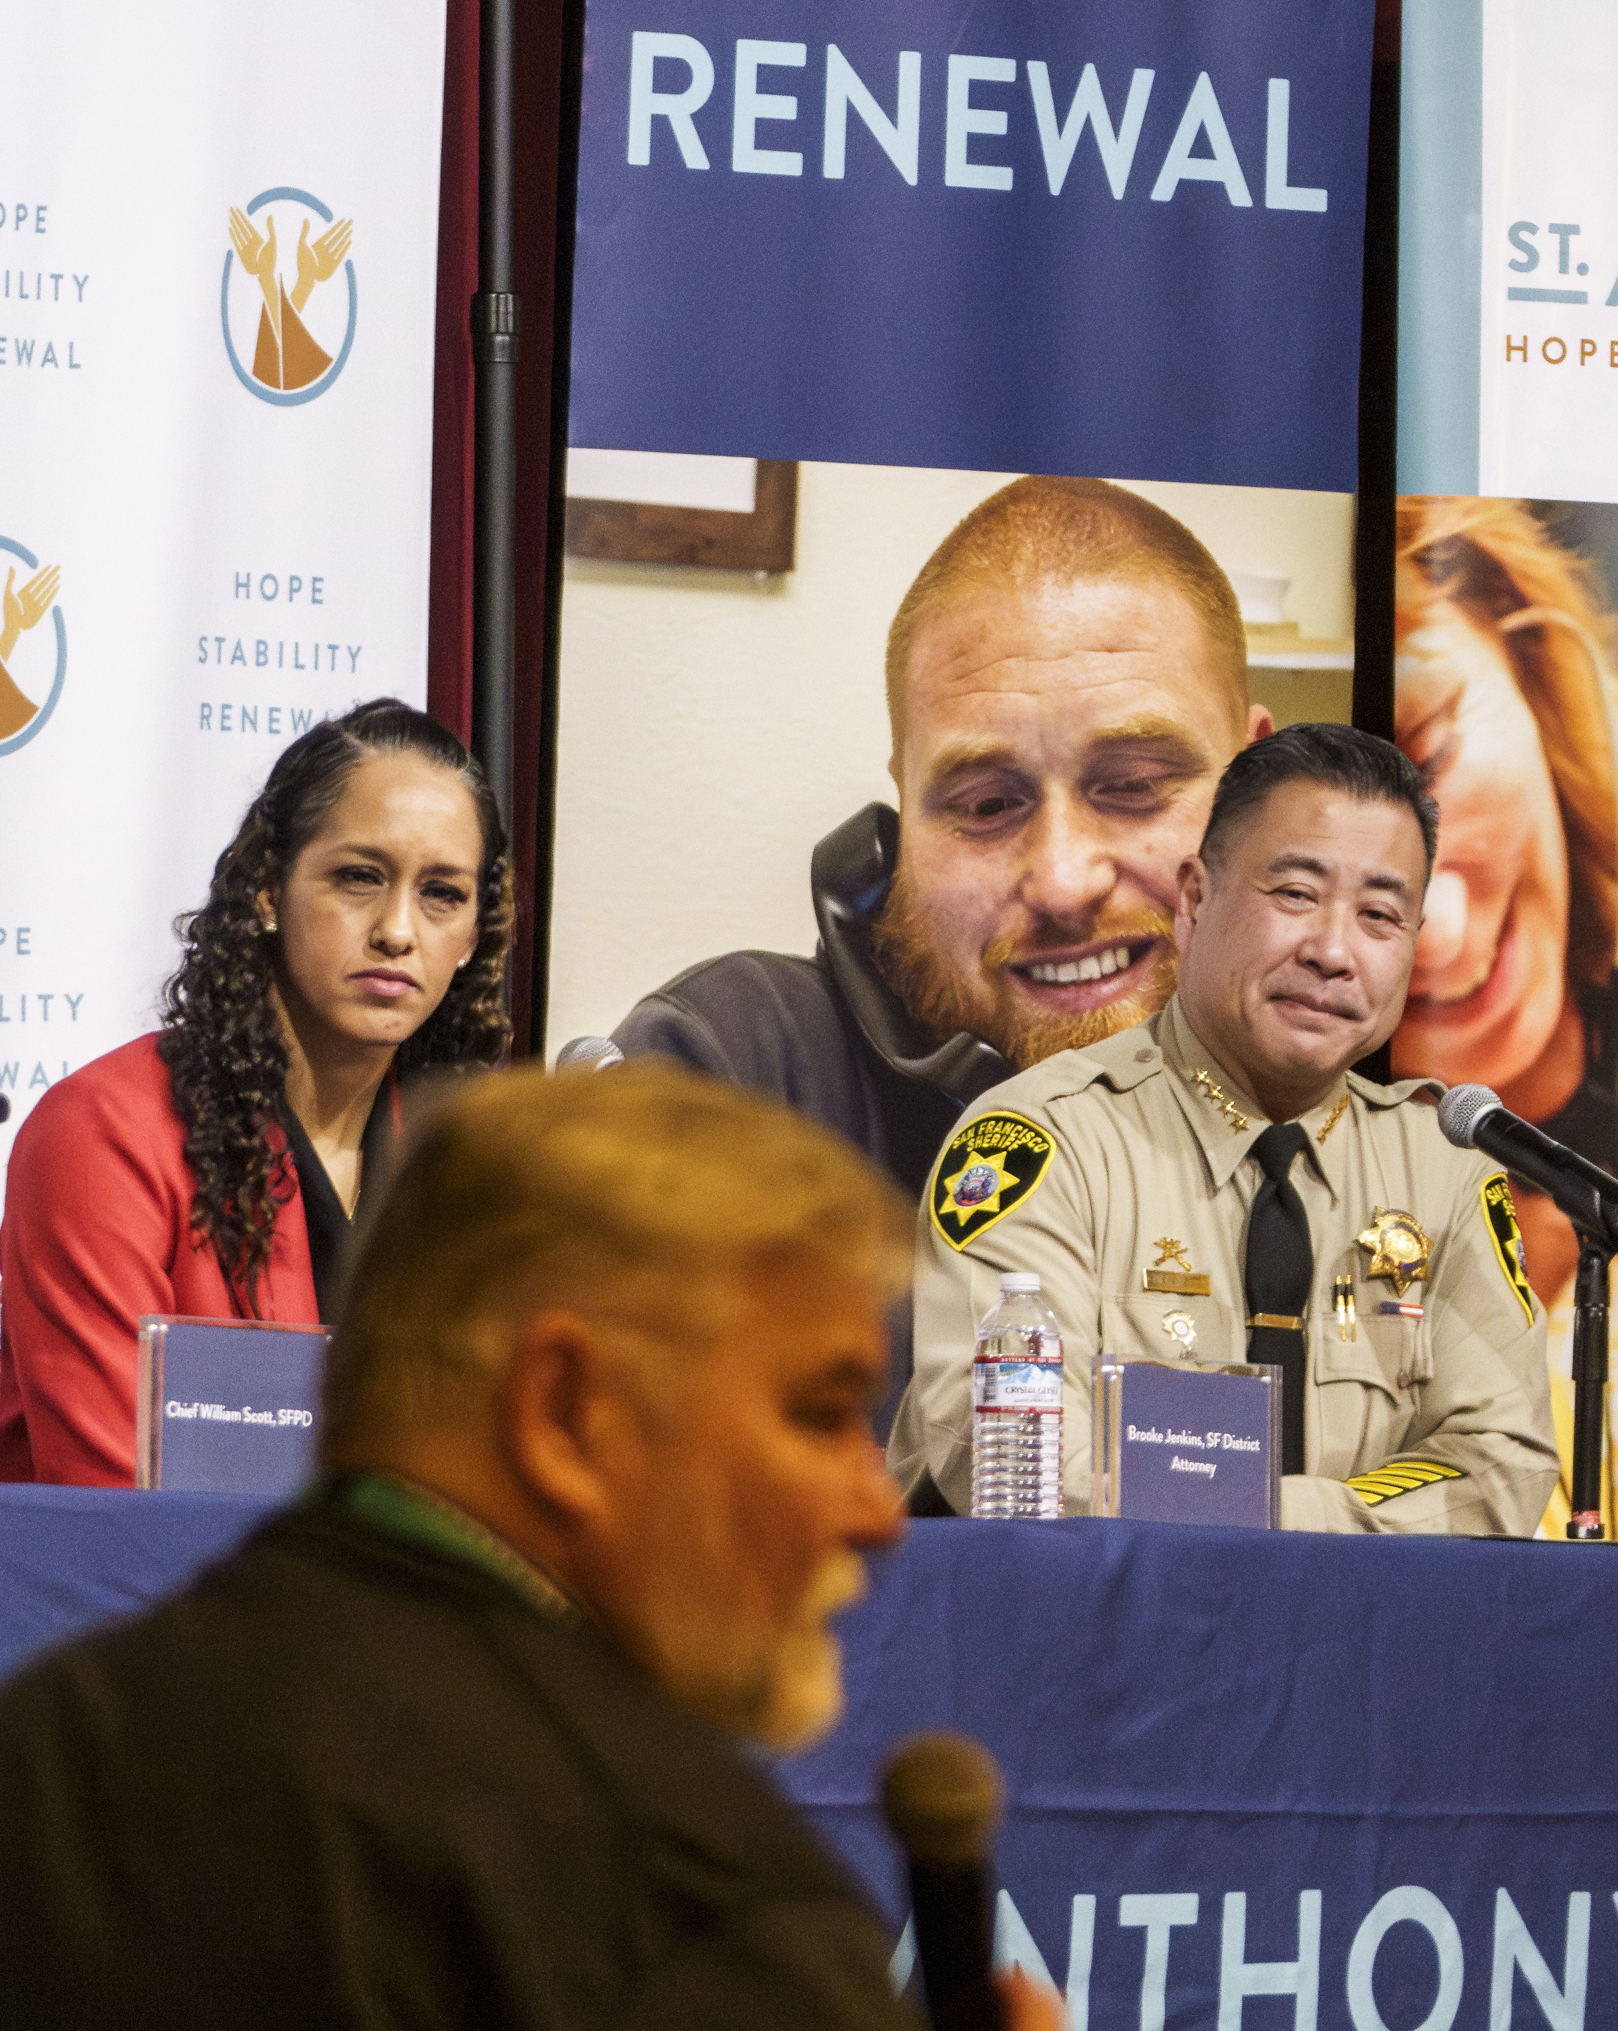 Several people sit at a table during a panel discussion. Two people are visible; one in a police uniform and another wearing a red outfit. A large backdrop displays the word &quot;RENEWAL.&quot;